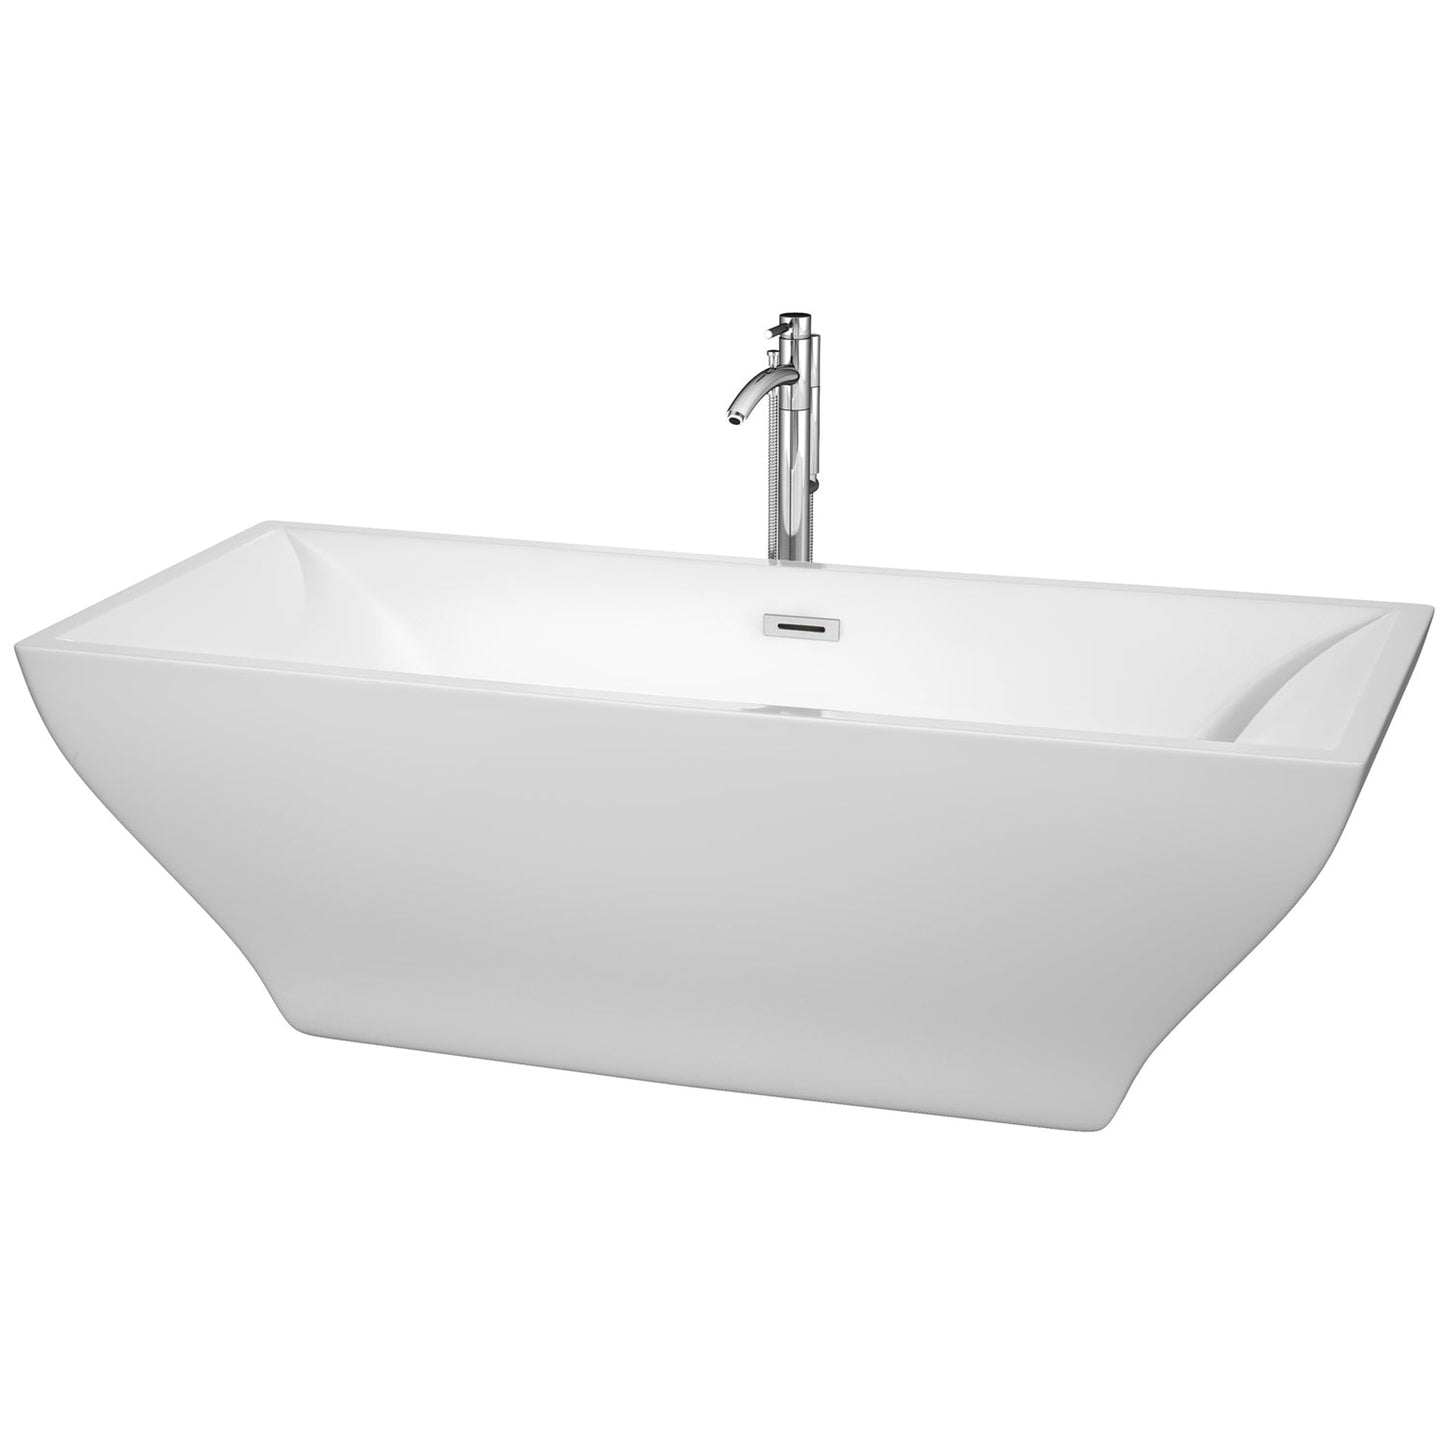 Wyndham Collection Maryam 71" Freestanding Bathtub in White With Floor Mounted Faucet, Drain and Overflow Trim in Polished Chrome